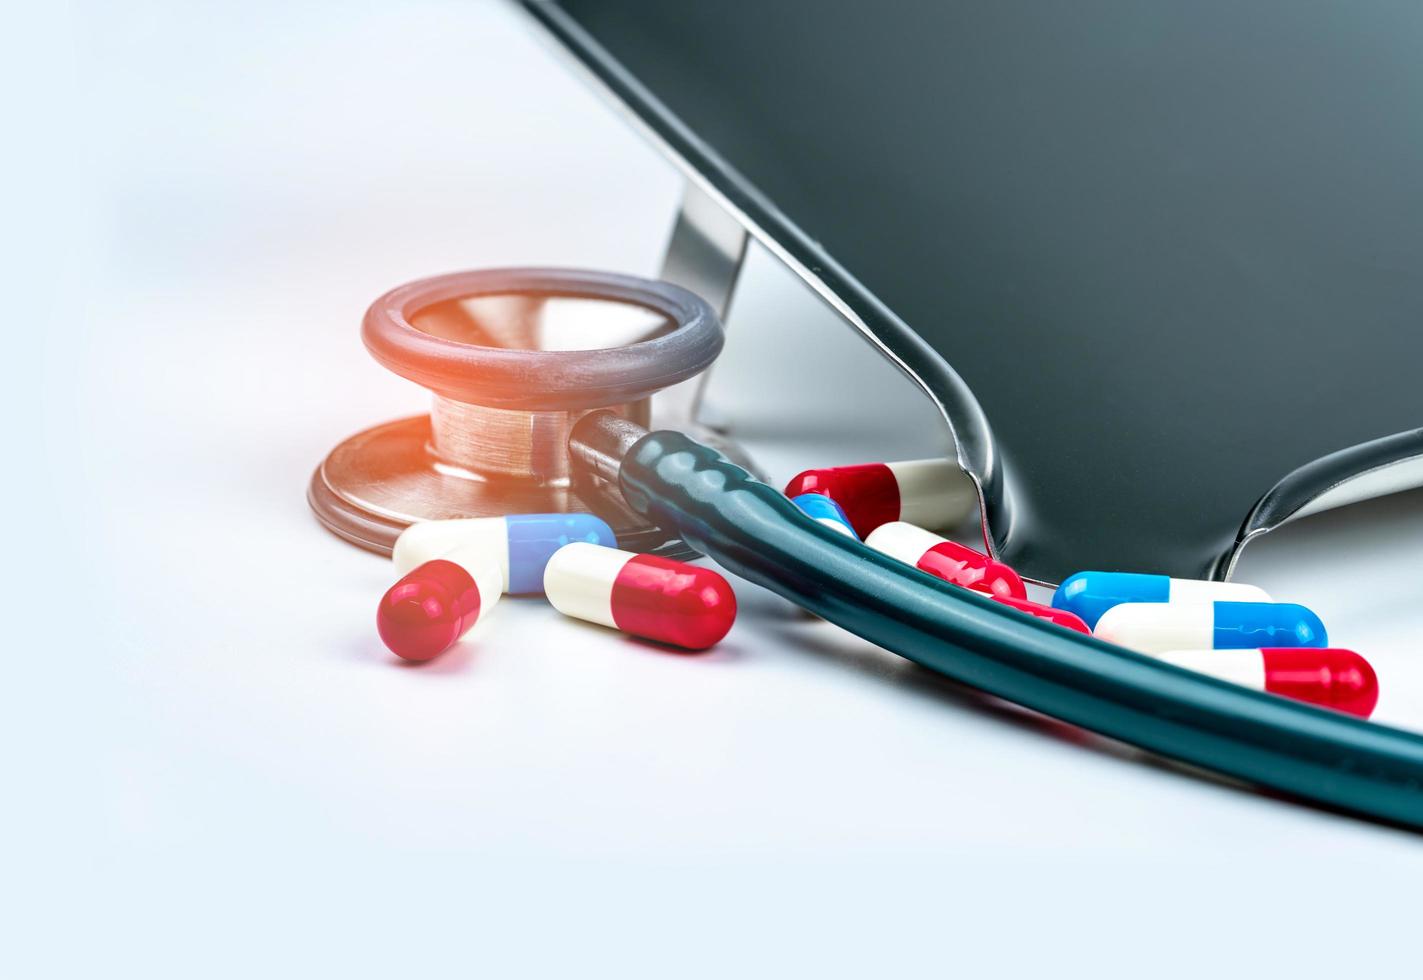 Green stethoscope with pile of antibiotic capsule pills on white table near drug tray. Antimicrobial drug resistance and overuse. Medical equipment for doctor. Clinical Cardiology concept. Health care photo